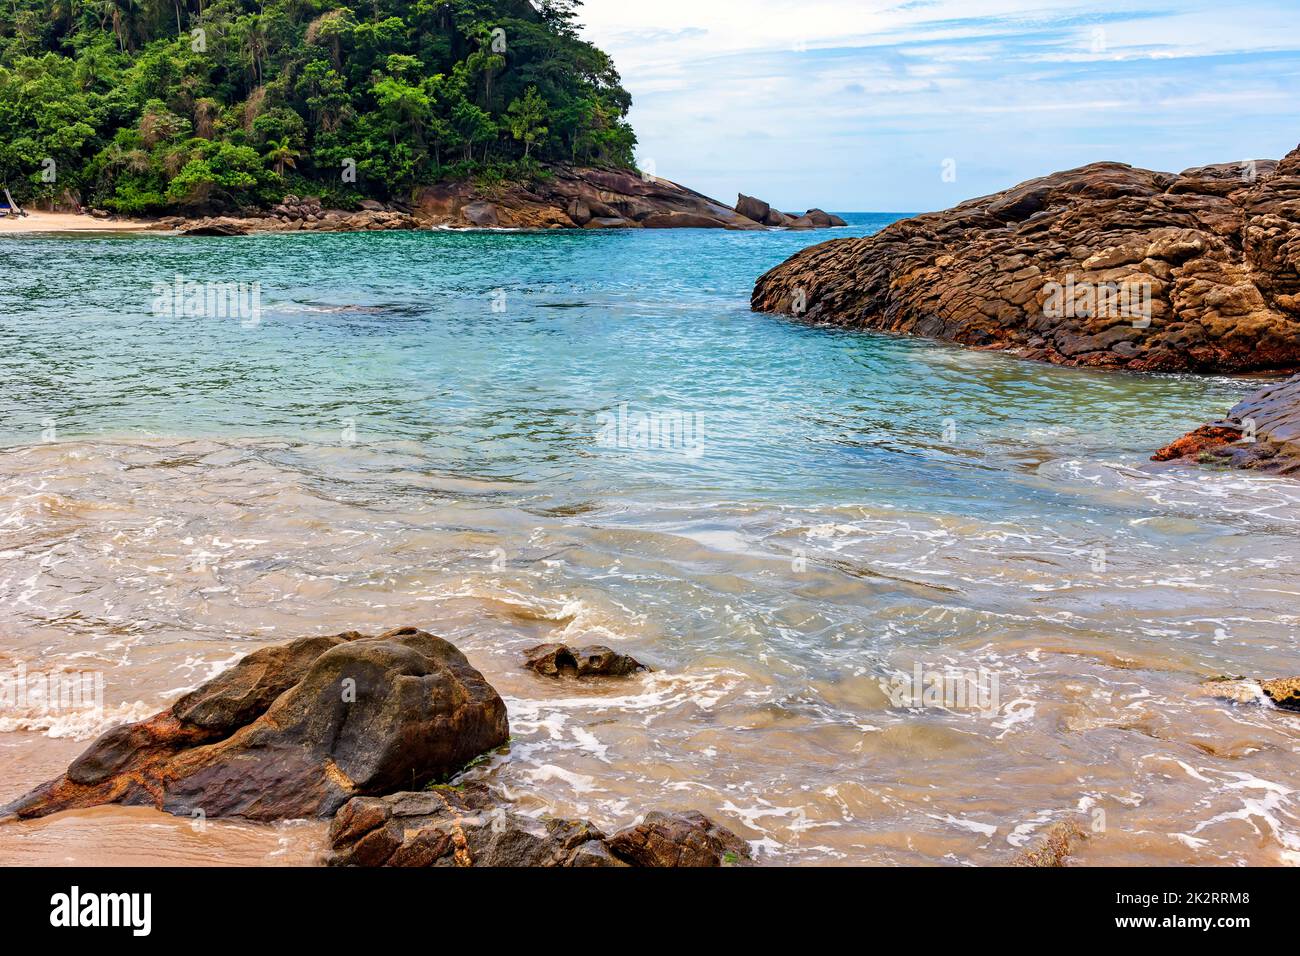 Untouched and deserted beach, surrounded by rainforest Stock Photo